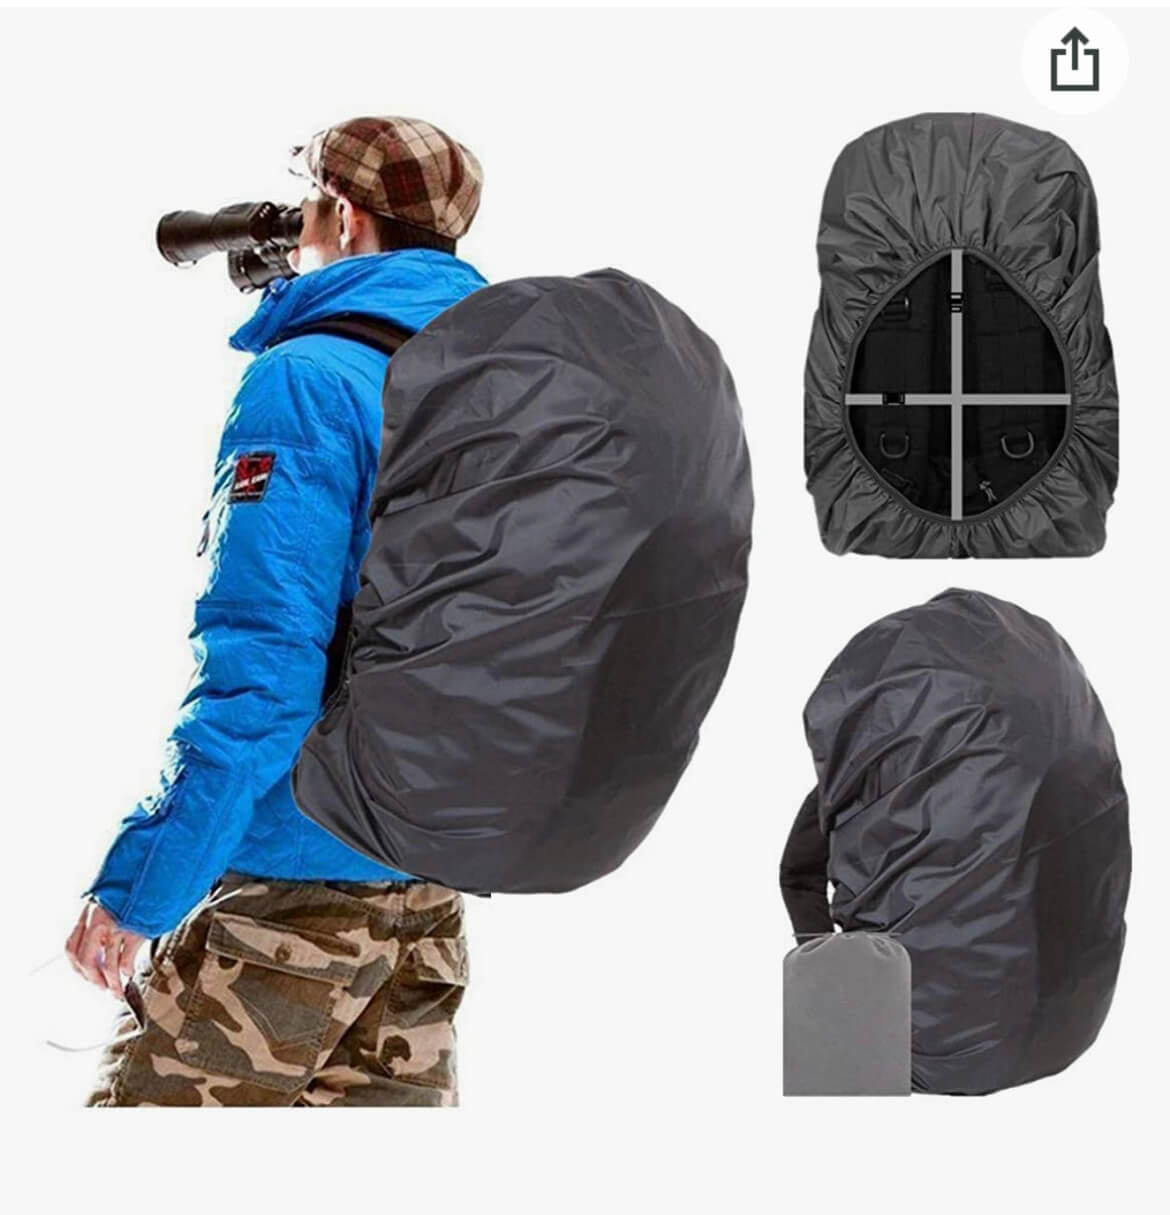 Rainfly for your hiking pack